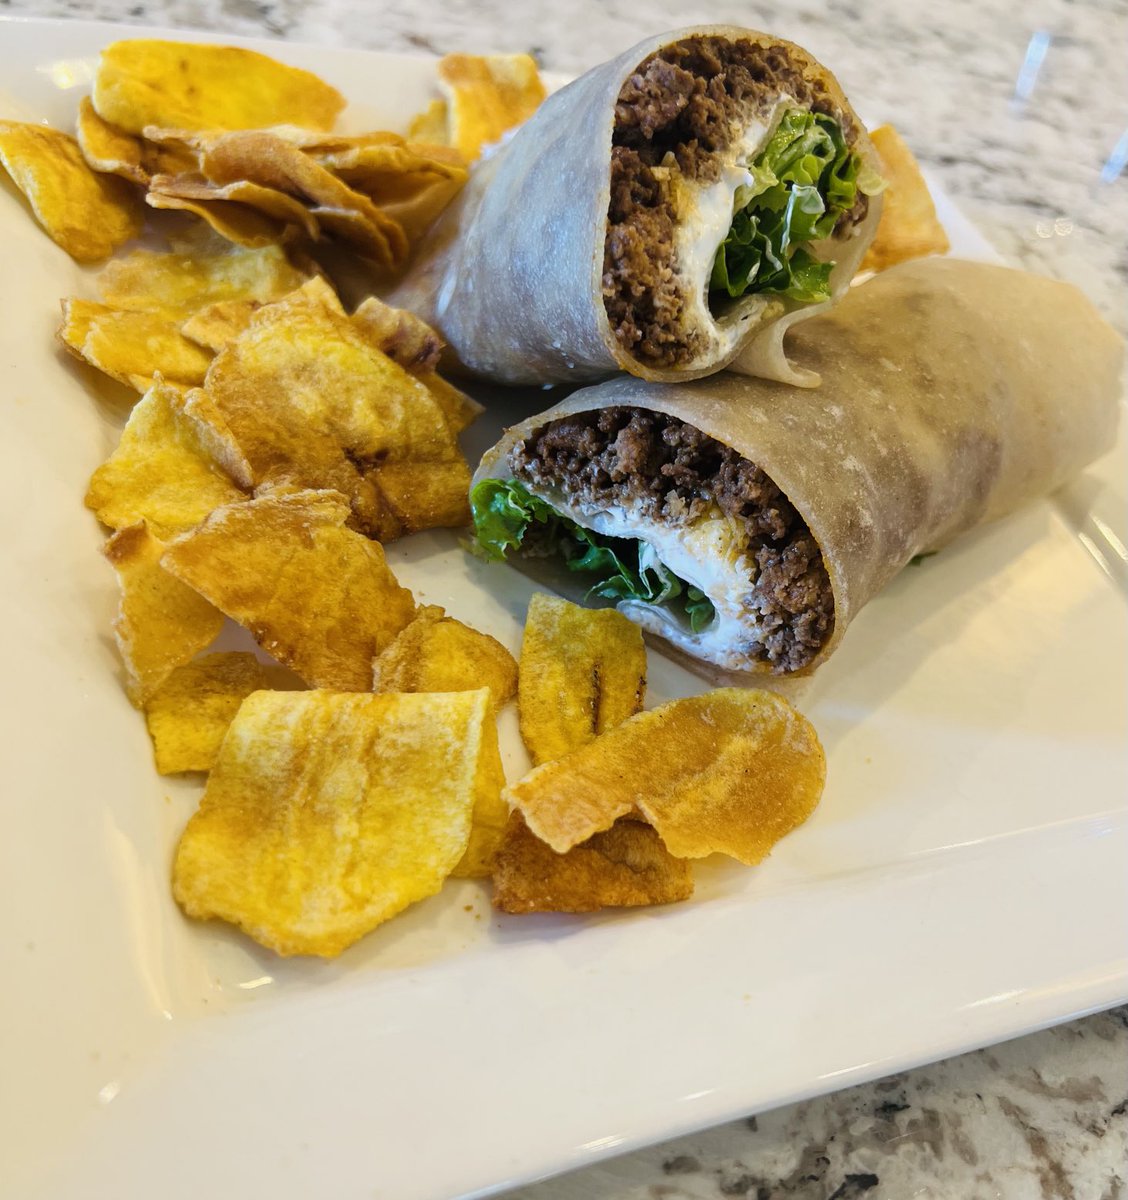 Seasoned grass fed/finished beef in cassava wrap with organic sour cream, goat mozzarella, and greens. Plantain chips. Husband loves this. #smallchanges